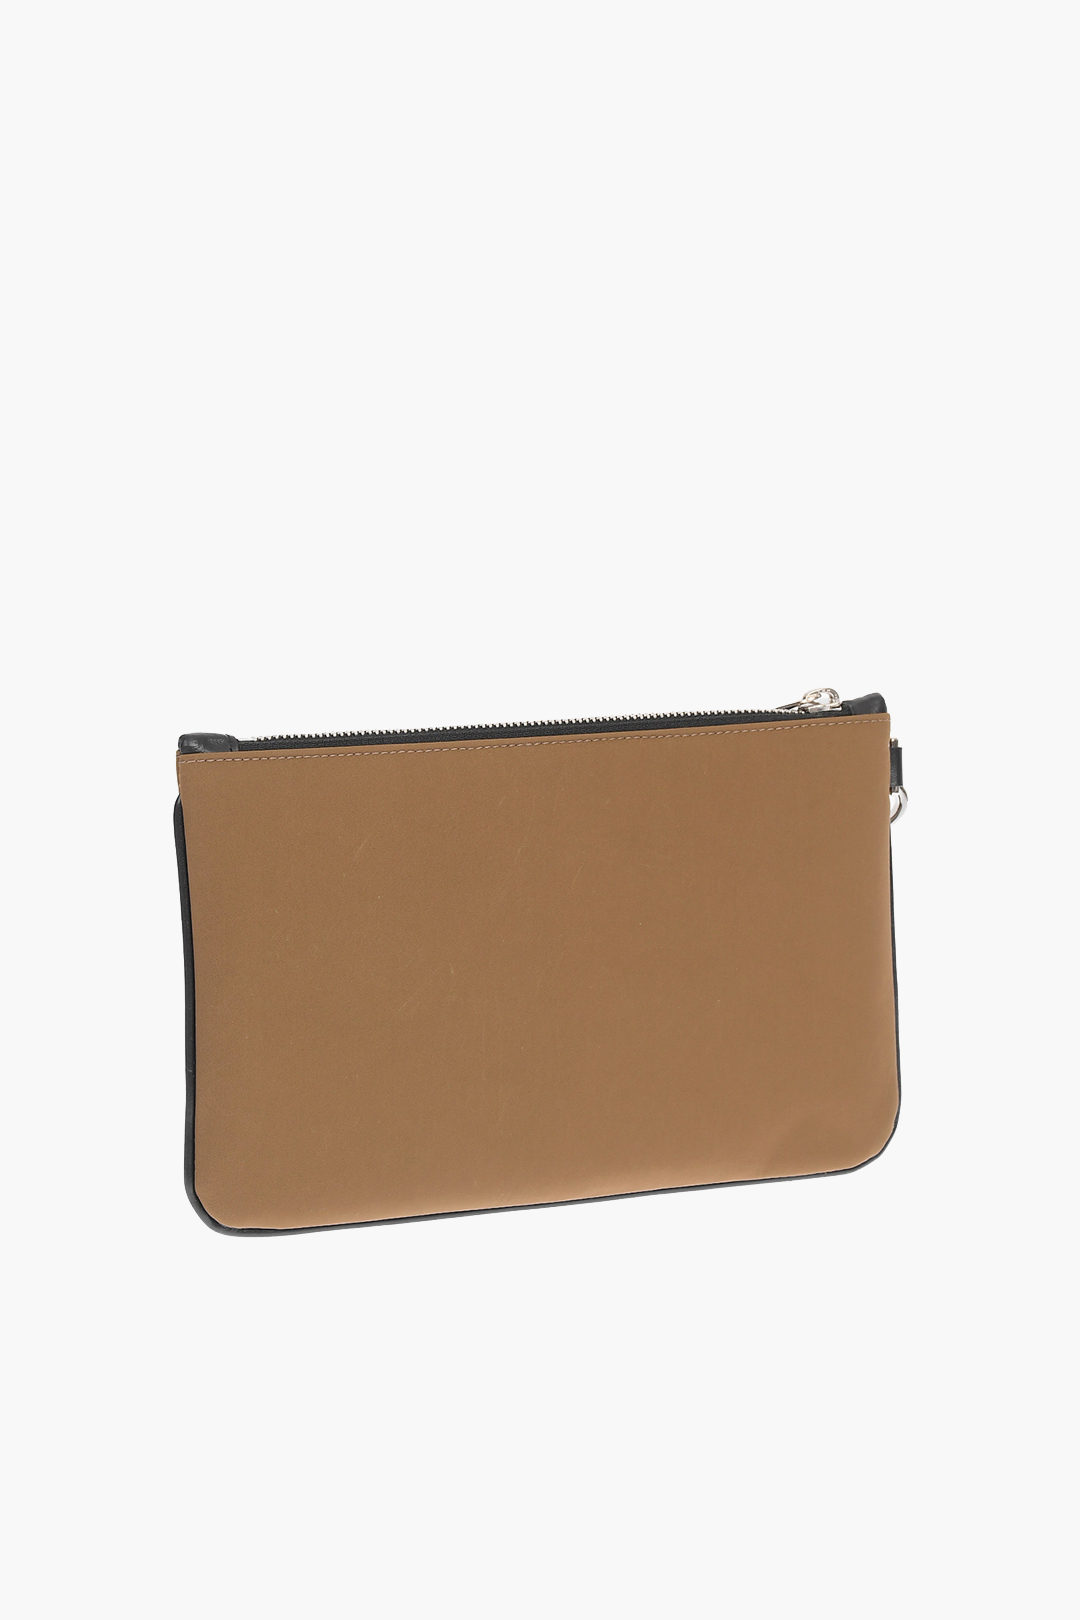 Neil Barrett Solid Color MONOGRAM SOLID Pouch with Embossed Logo men ...